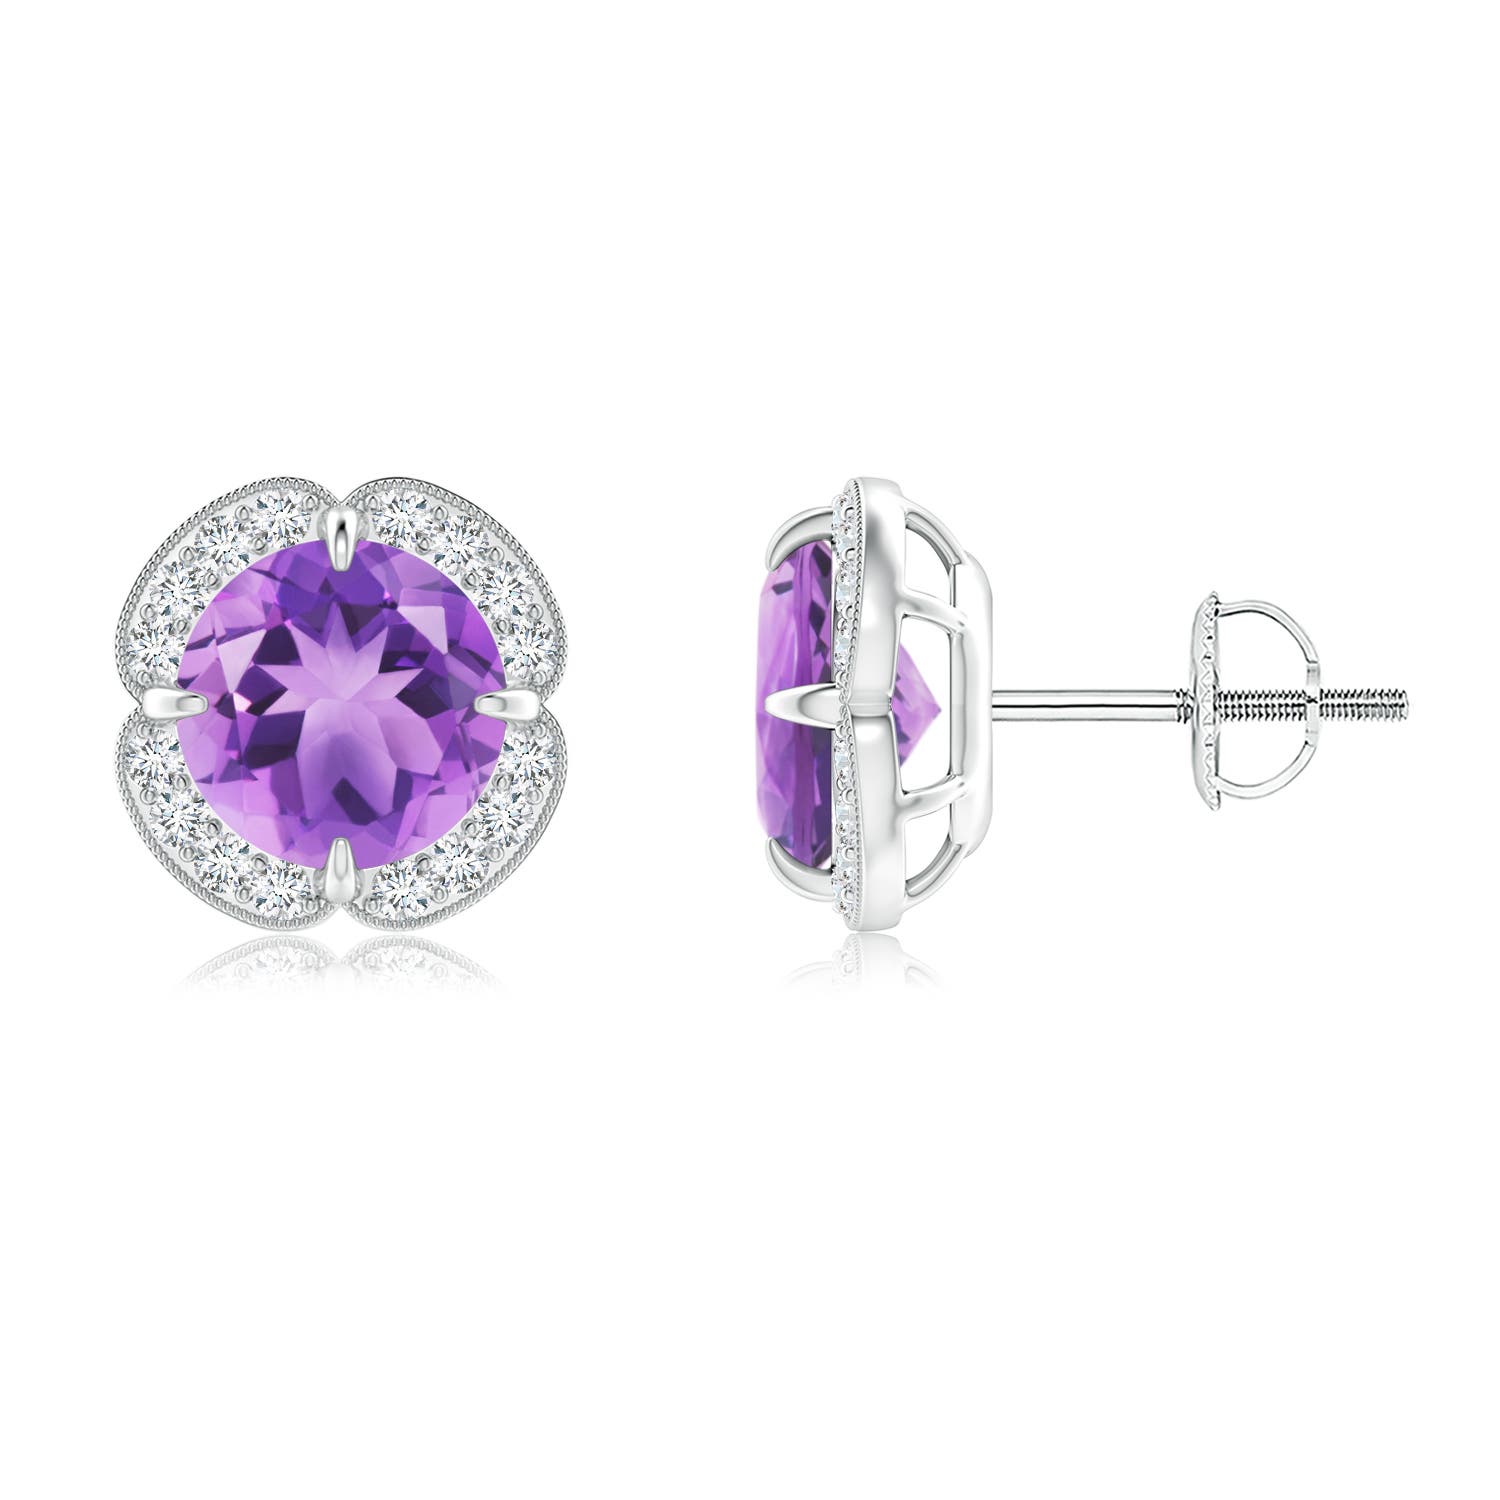 A - Amethyst / 2.56 CT / 14 KT White Gold